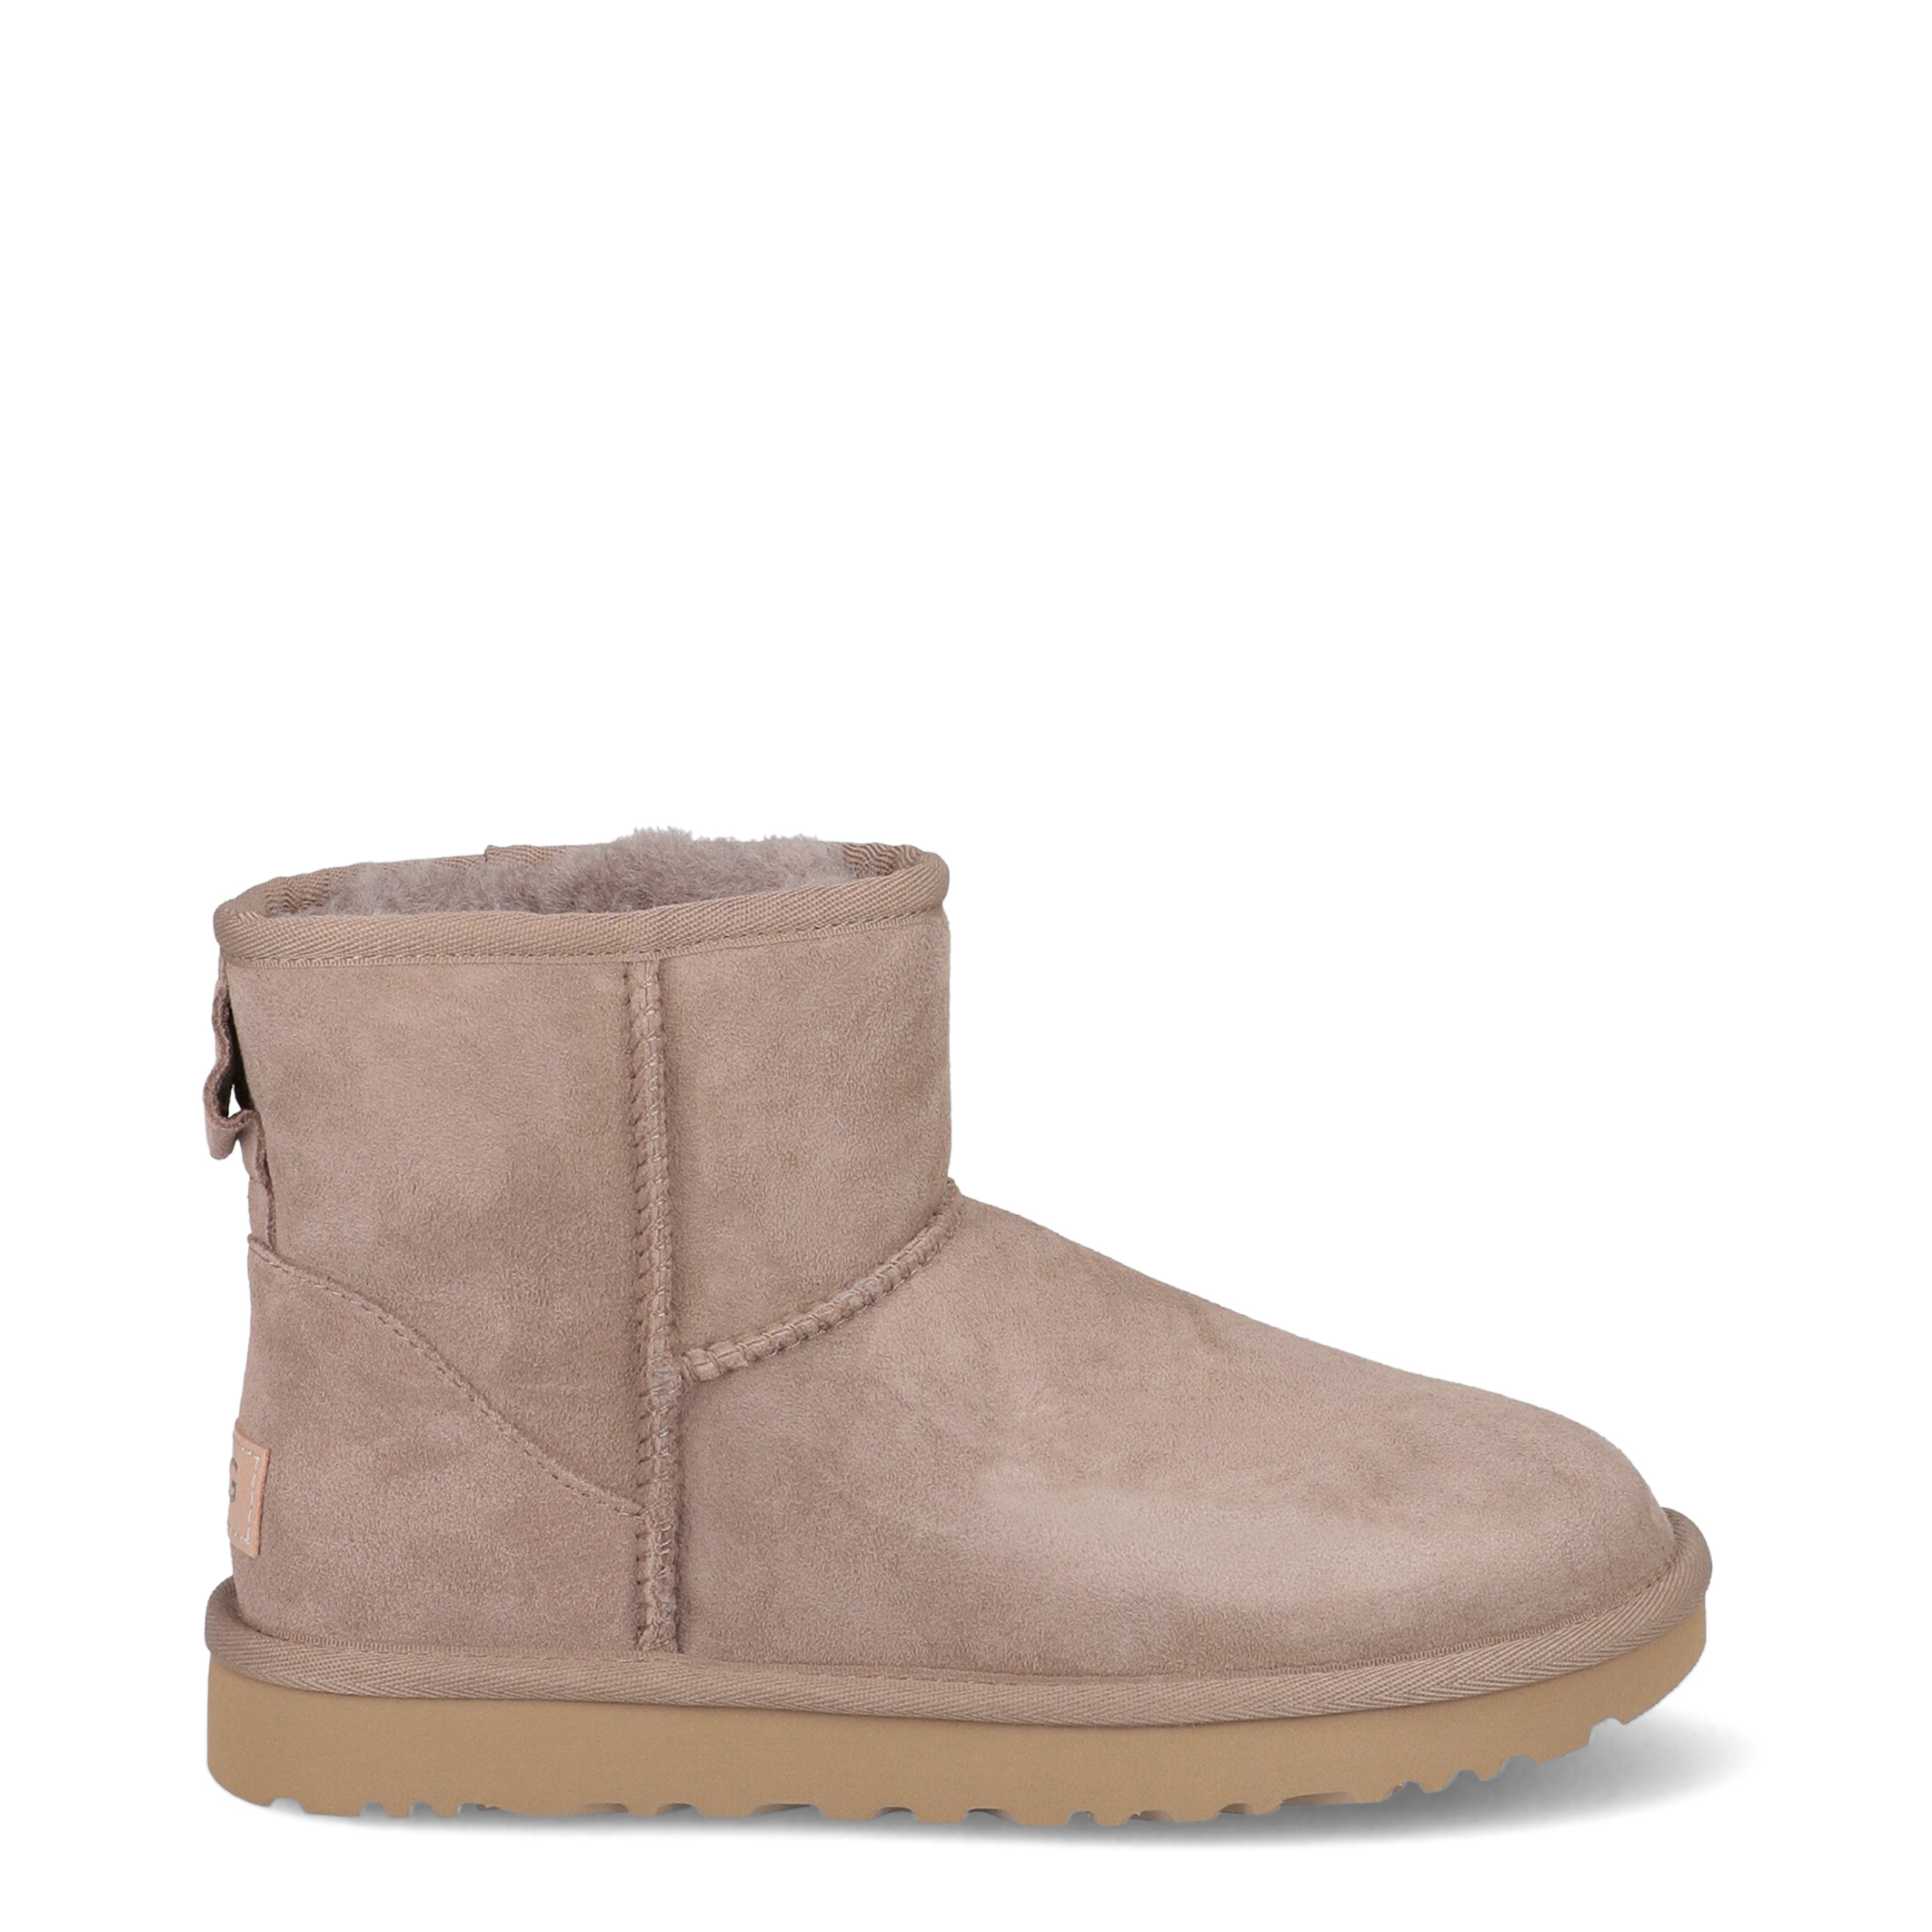 uggs wholesale outlet